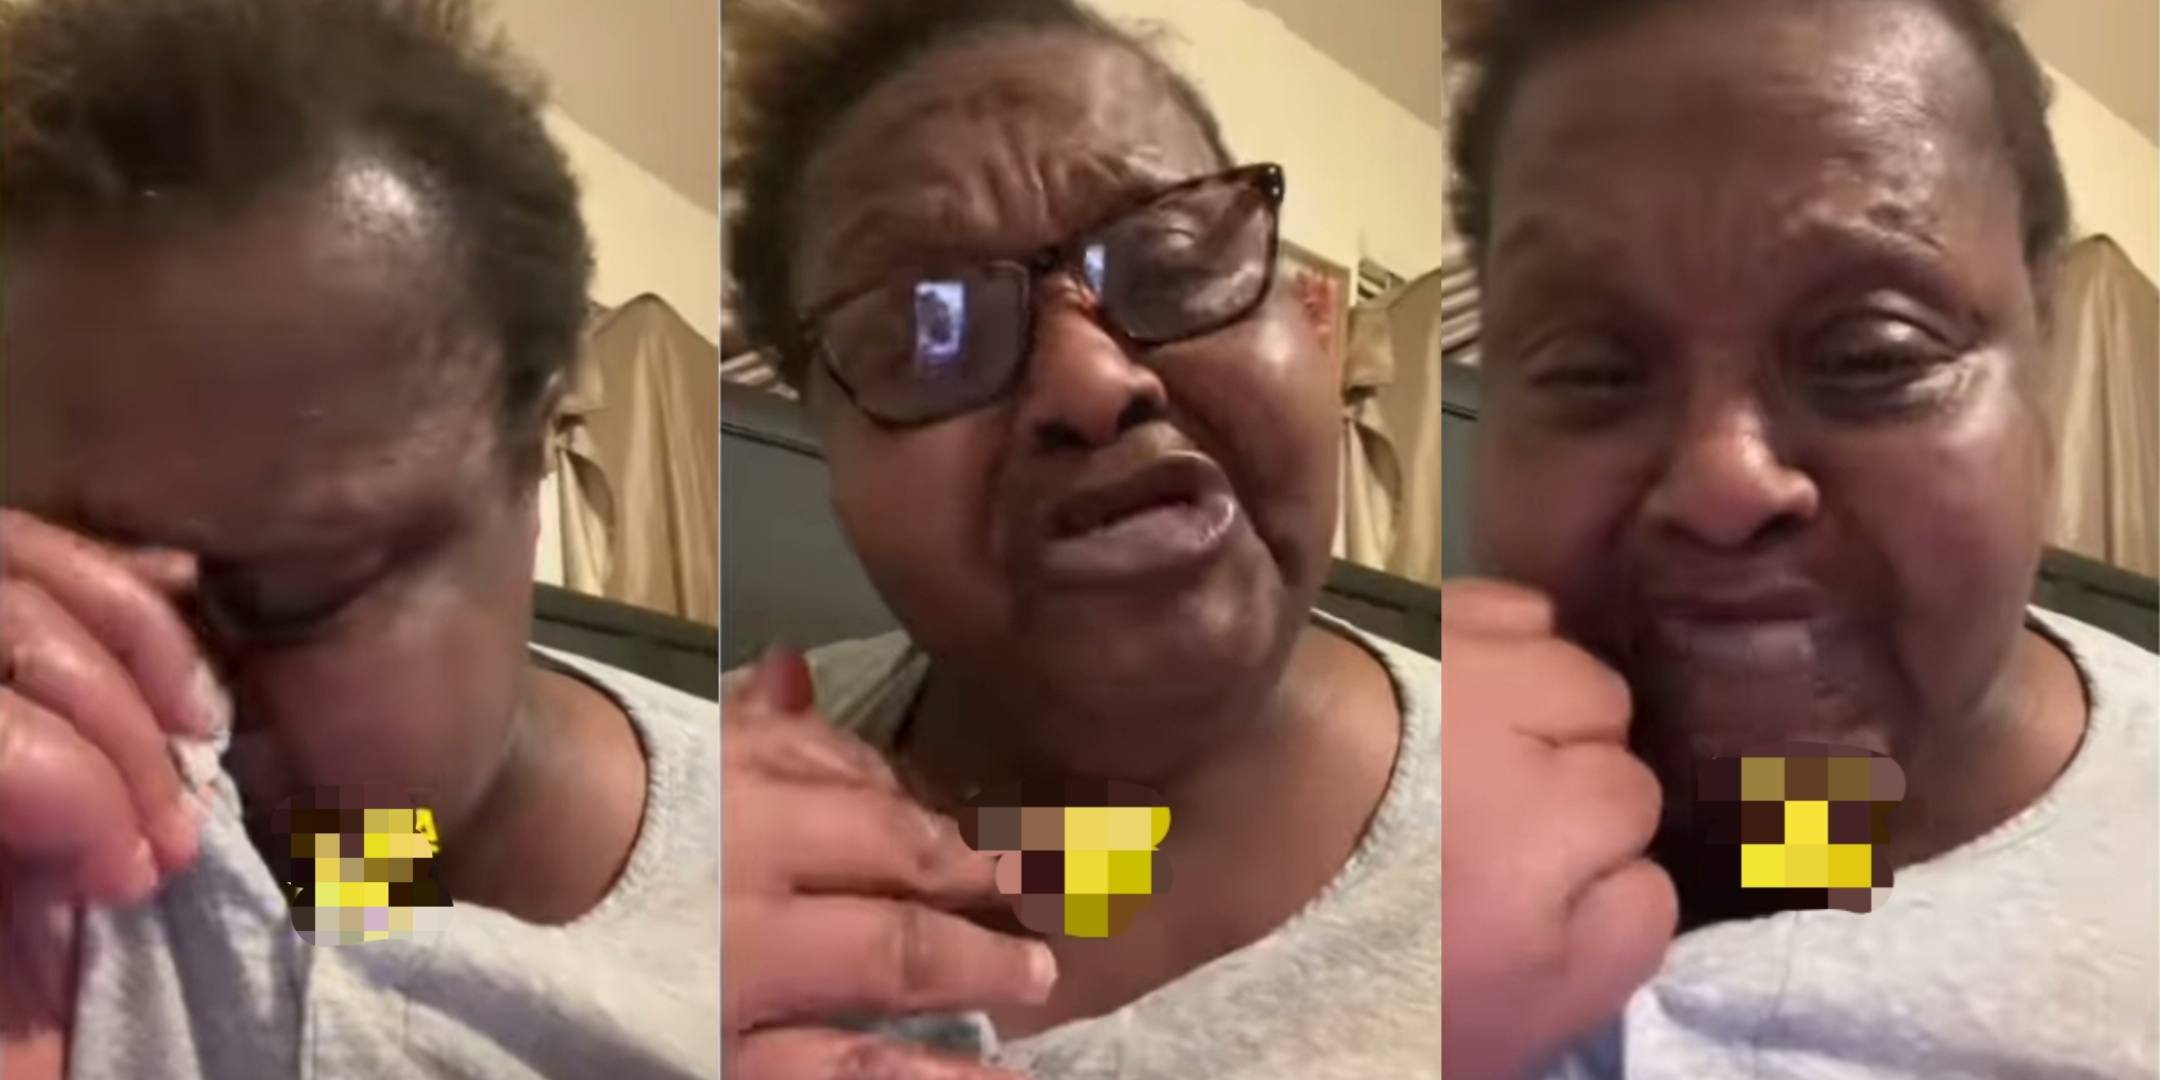 "I'm tired of being alone; I just want to be someone's wife or girlfriend" – Elderly woman cries out